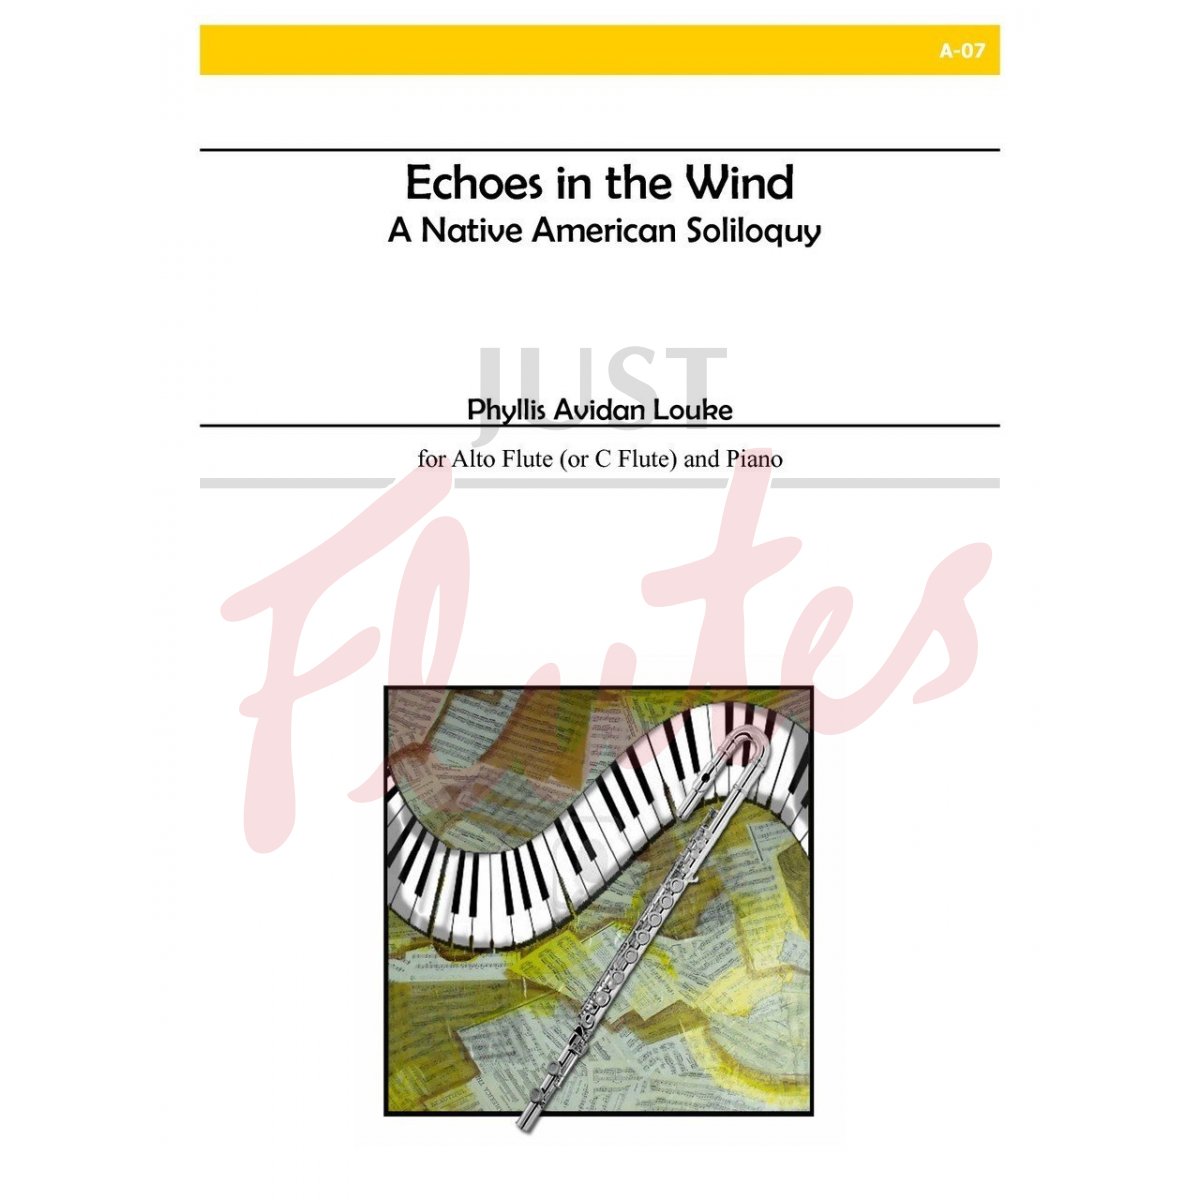 Echoes in the Wind - A Native American Soliloquy for Alto Flute (or C Flute) and Piano